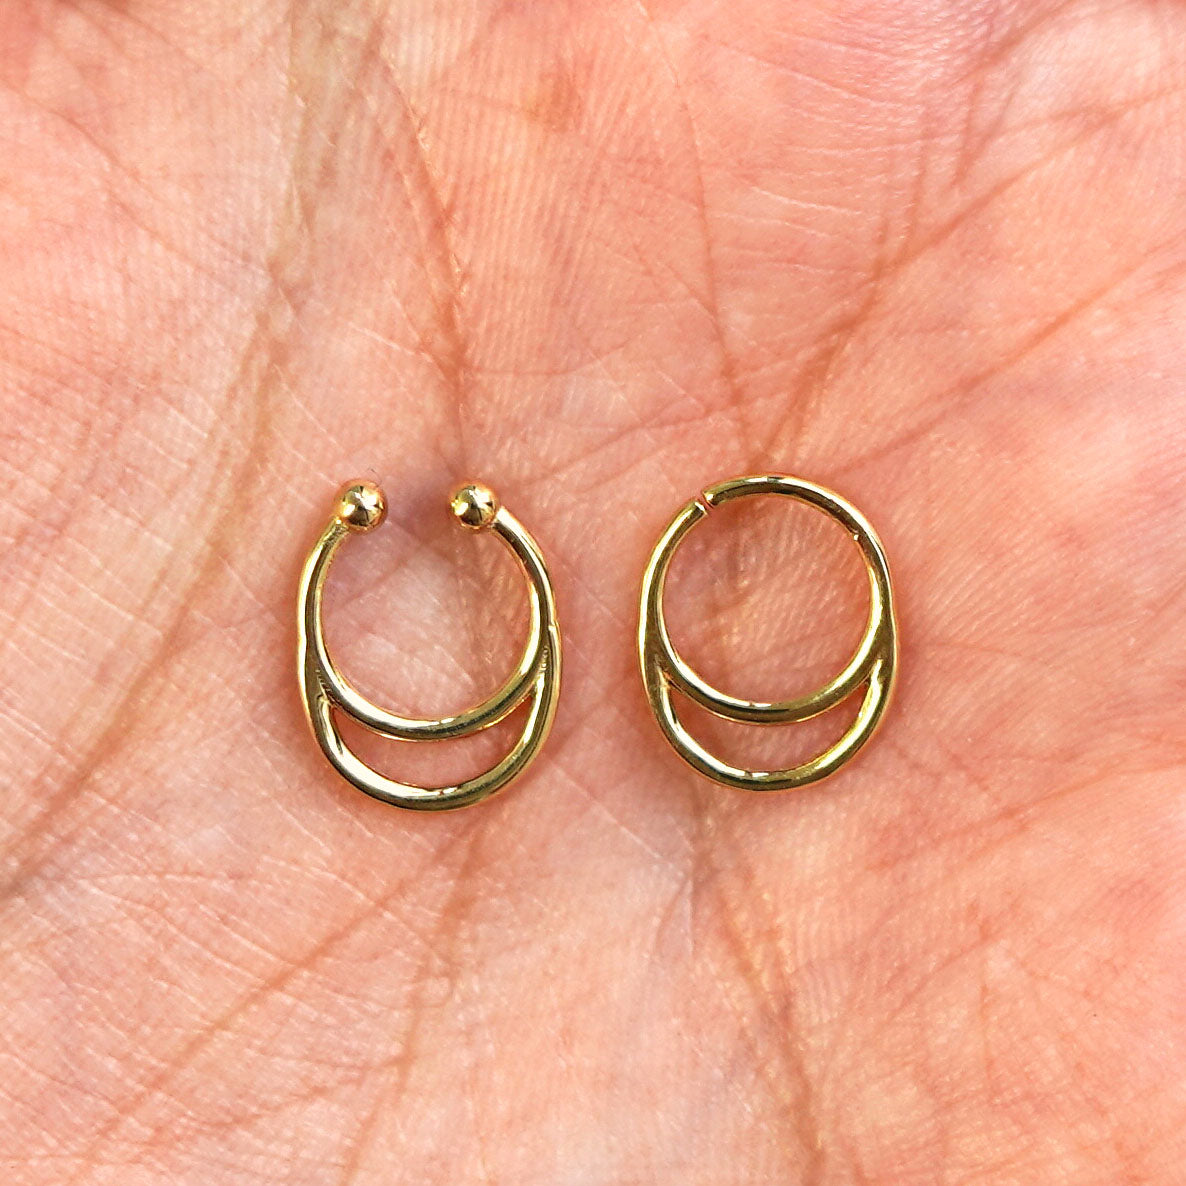 Two 14k gold Double Circle Septum rings show in options of Non-Pierced and Pierced resting in the palm of a model's hand